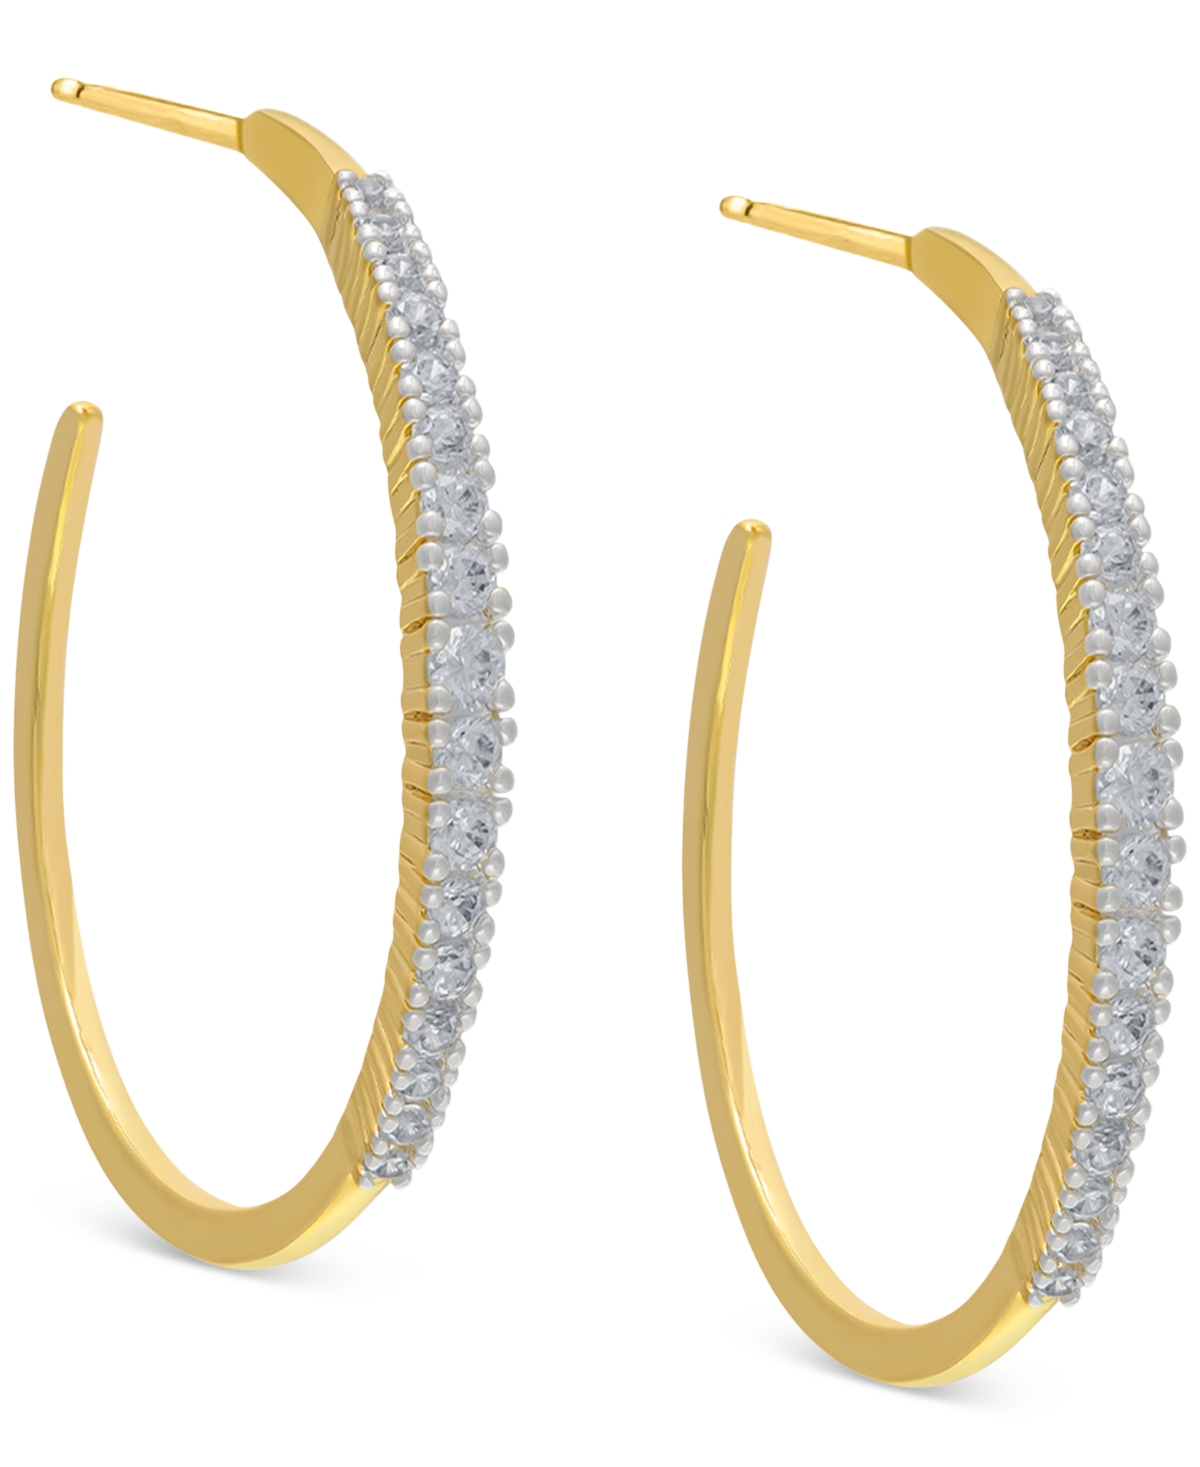 Macy's Black Spinel In & Out Medium Hoop Earrings (1-3/4 ct. t.w.) in 14k Gold-Plated Sterling Silver, 1.2" (Also in Lab-Created White Sapphire)